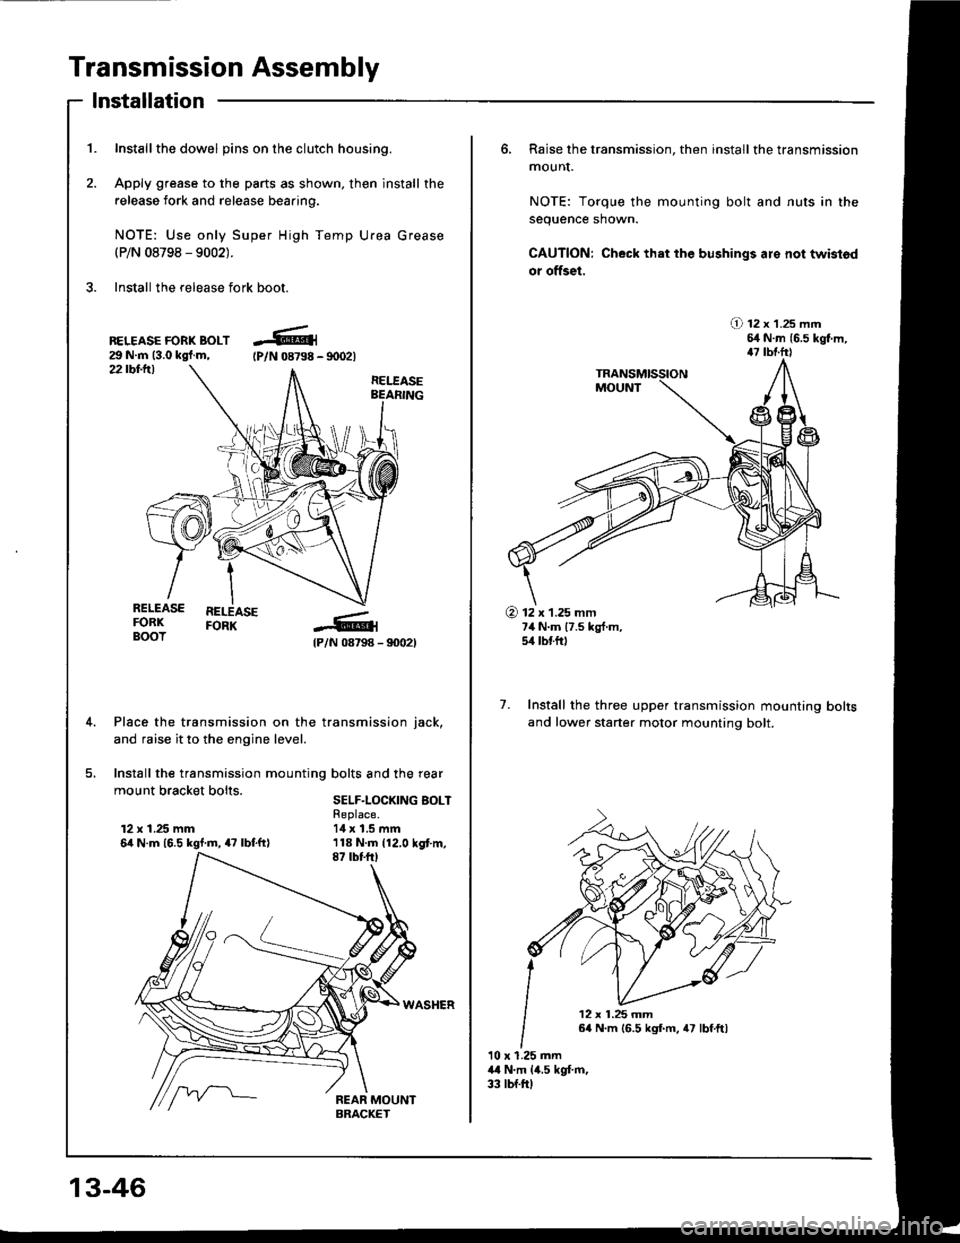 ACURA INTEGRA 1994  Service User Guide Transmission Assembly
1. Inst€llthe dowel pins on the clutch housing.
2. Apply grease to the parts as shown, then install the
release fork and release beaaing.
NOTE: Use only Super High Temp Urea Gr